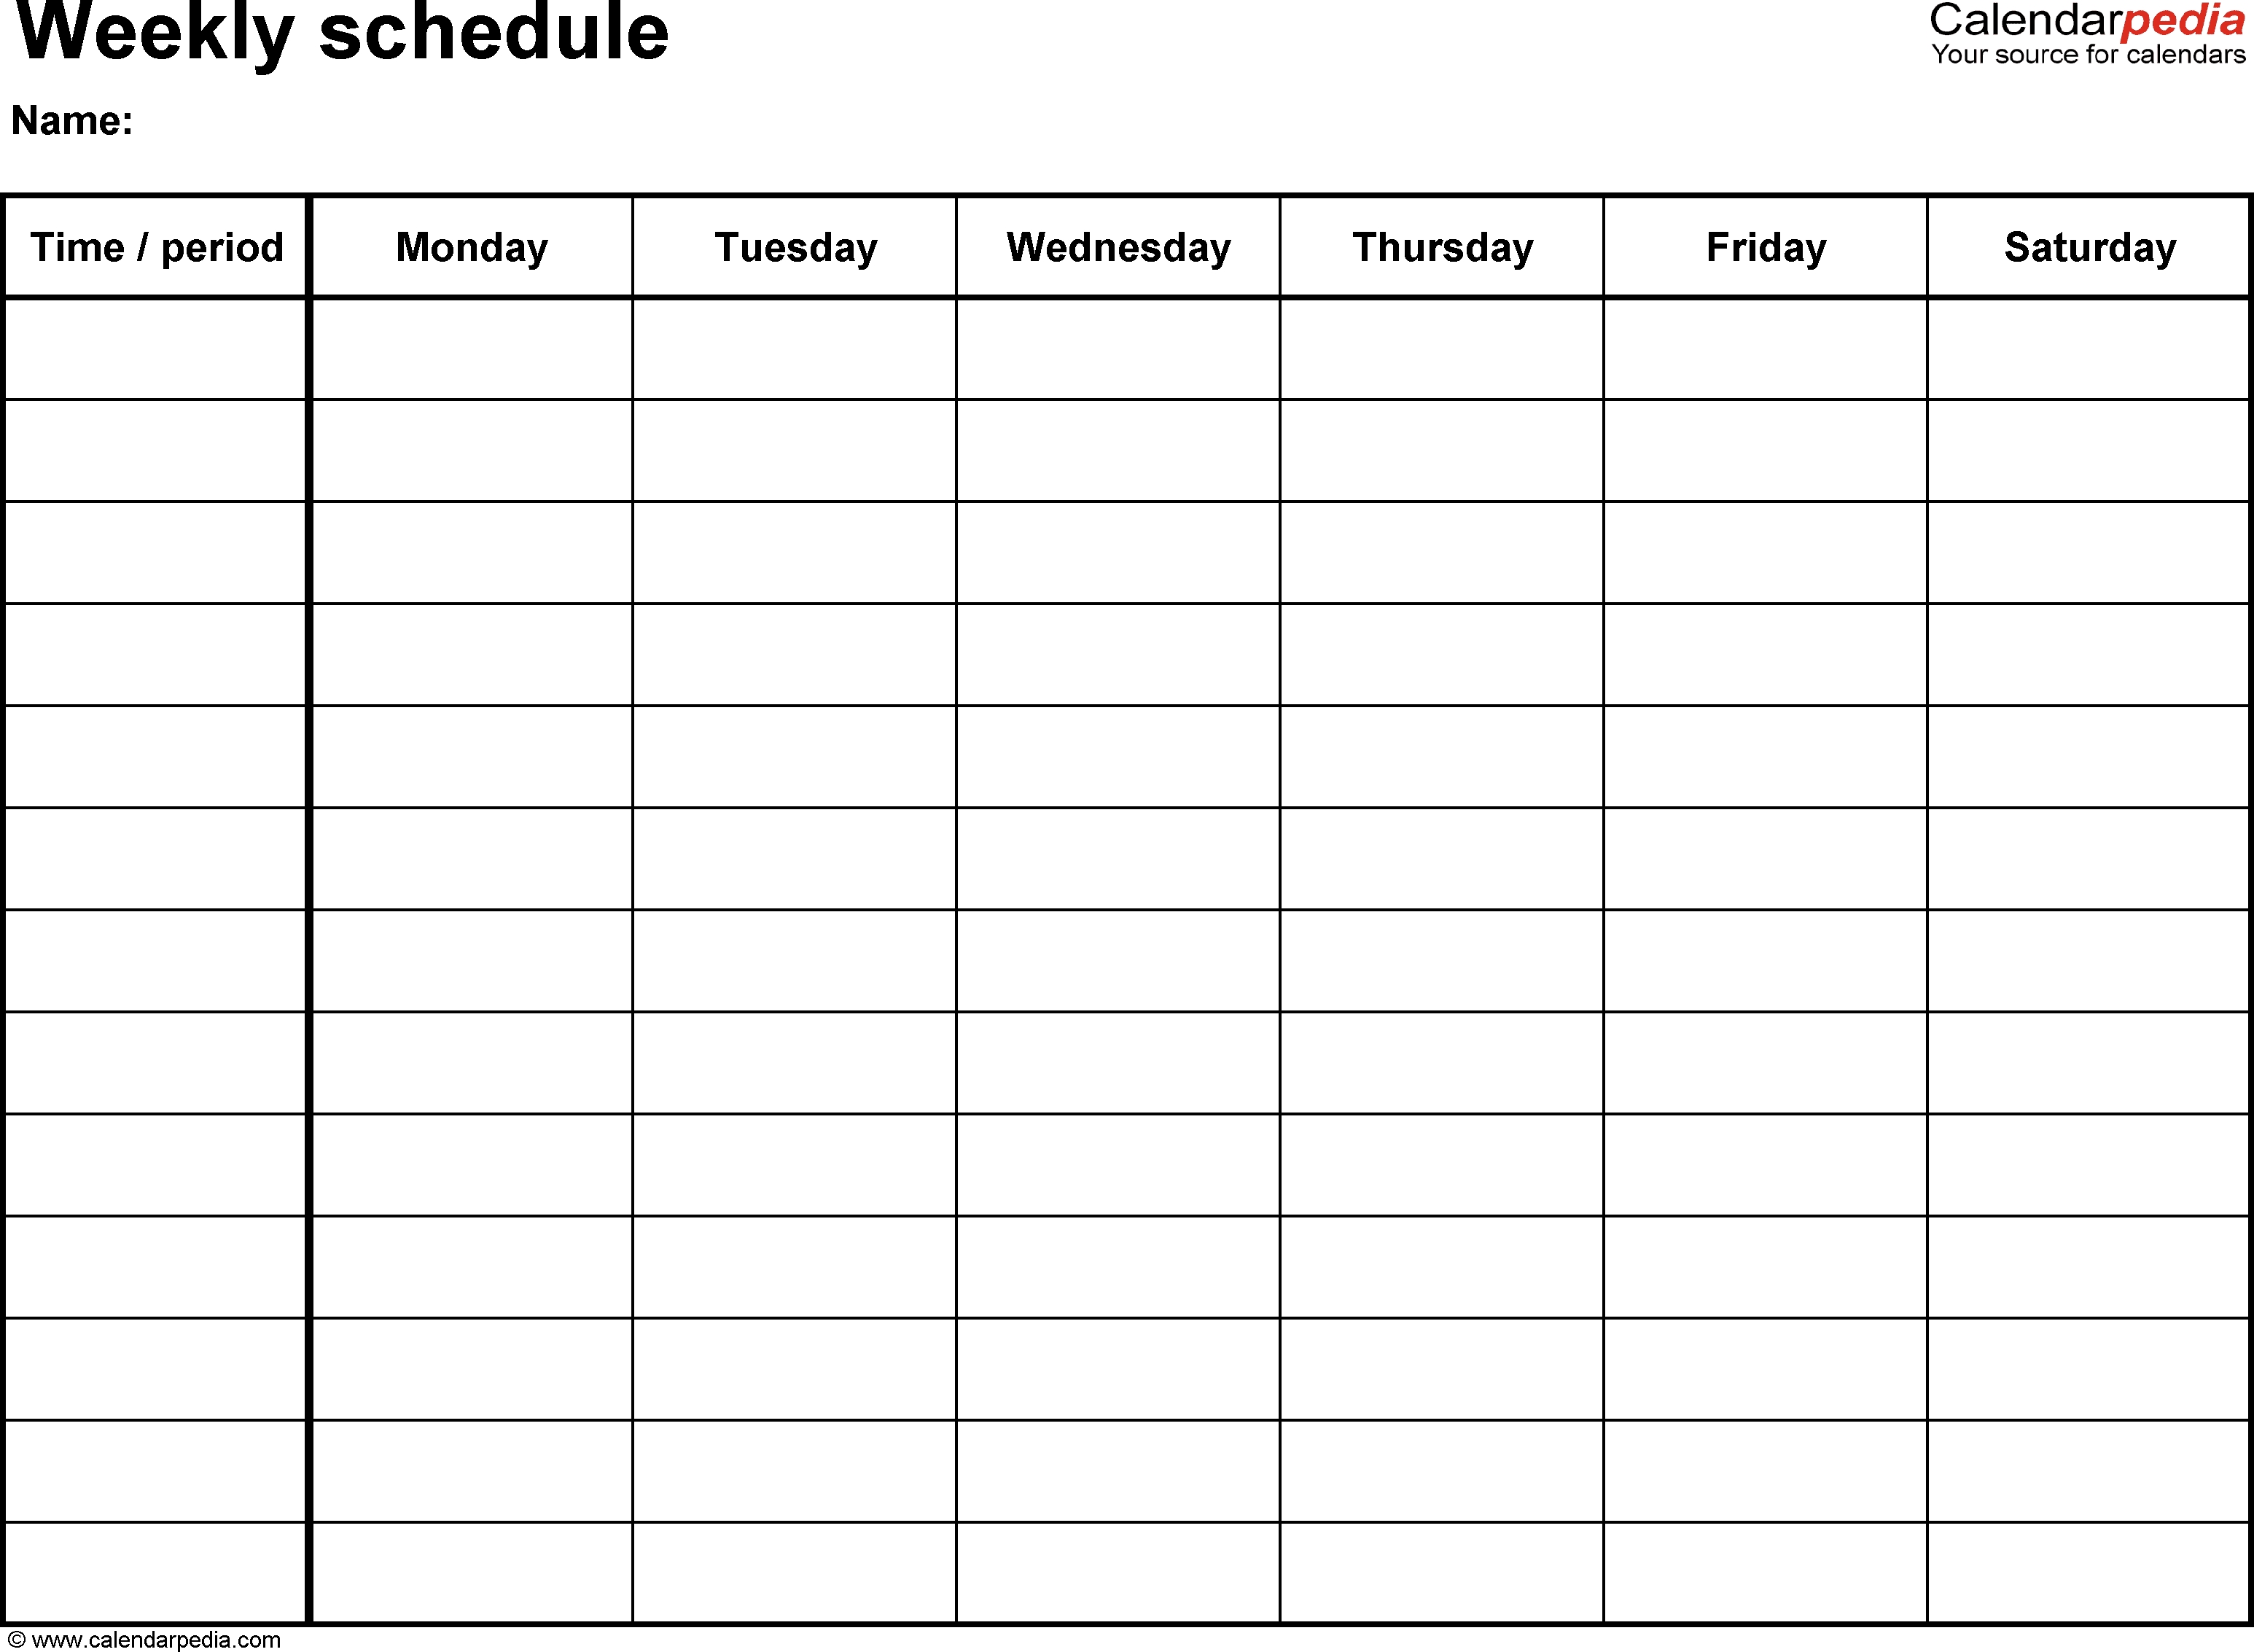 Free Weekly Schedule Templates For Excel - 18 Templates with regard to Week Schedule Template With Times